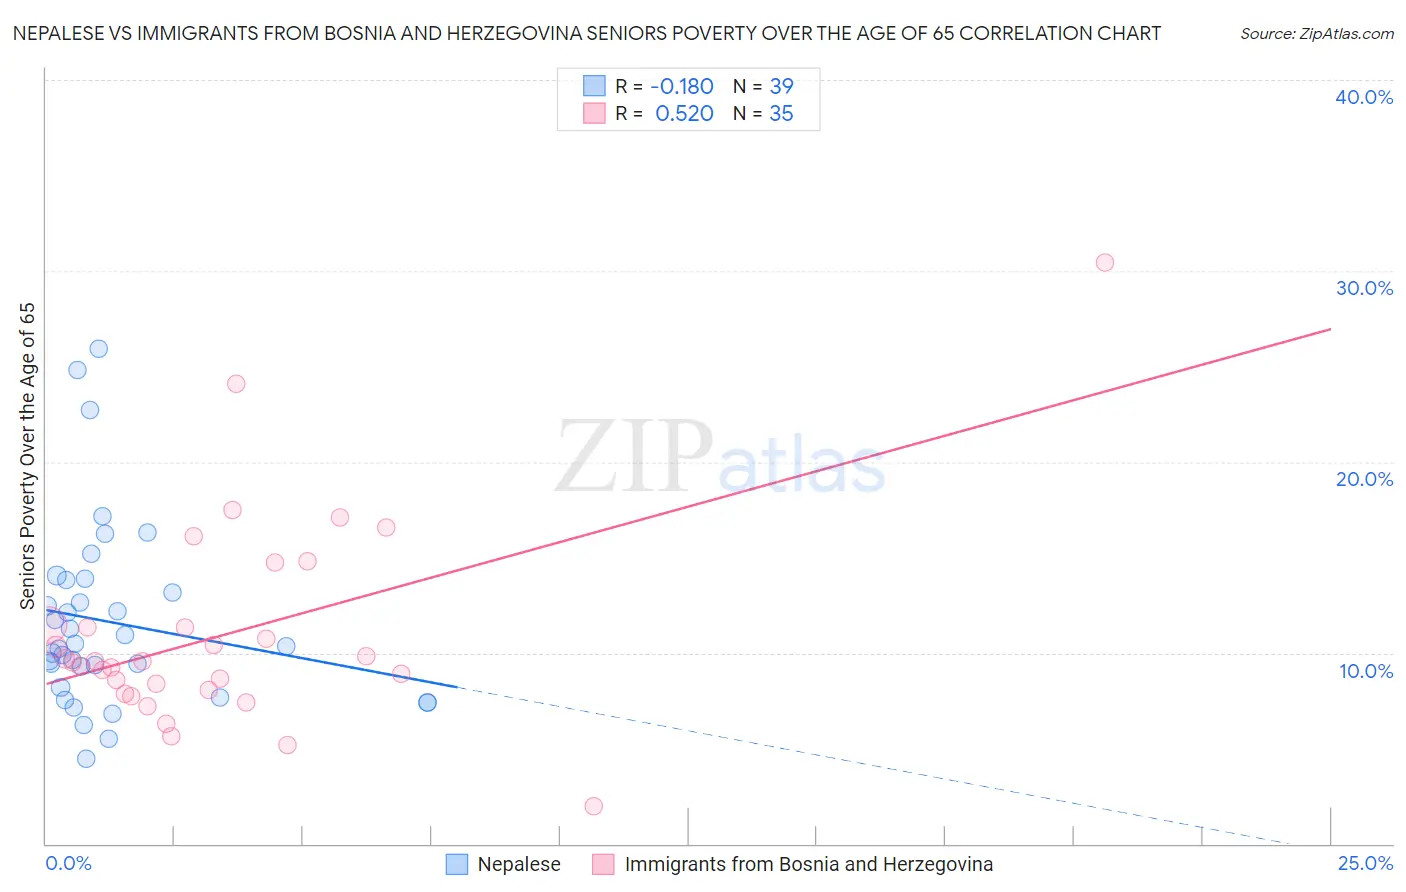 Nepalese vs Immigrants from Bosnia and Herzegovina Seniors Poverty Over the Age of 65